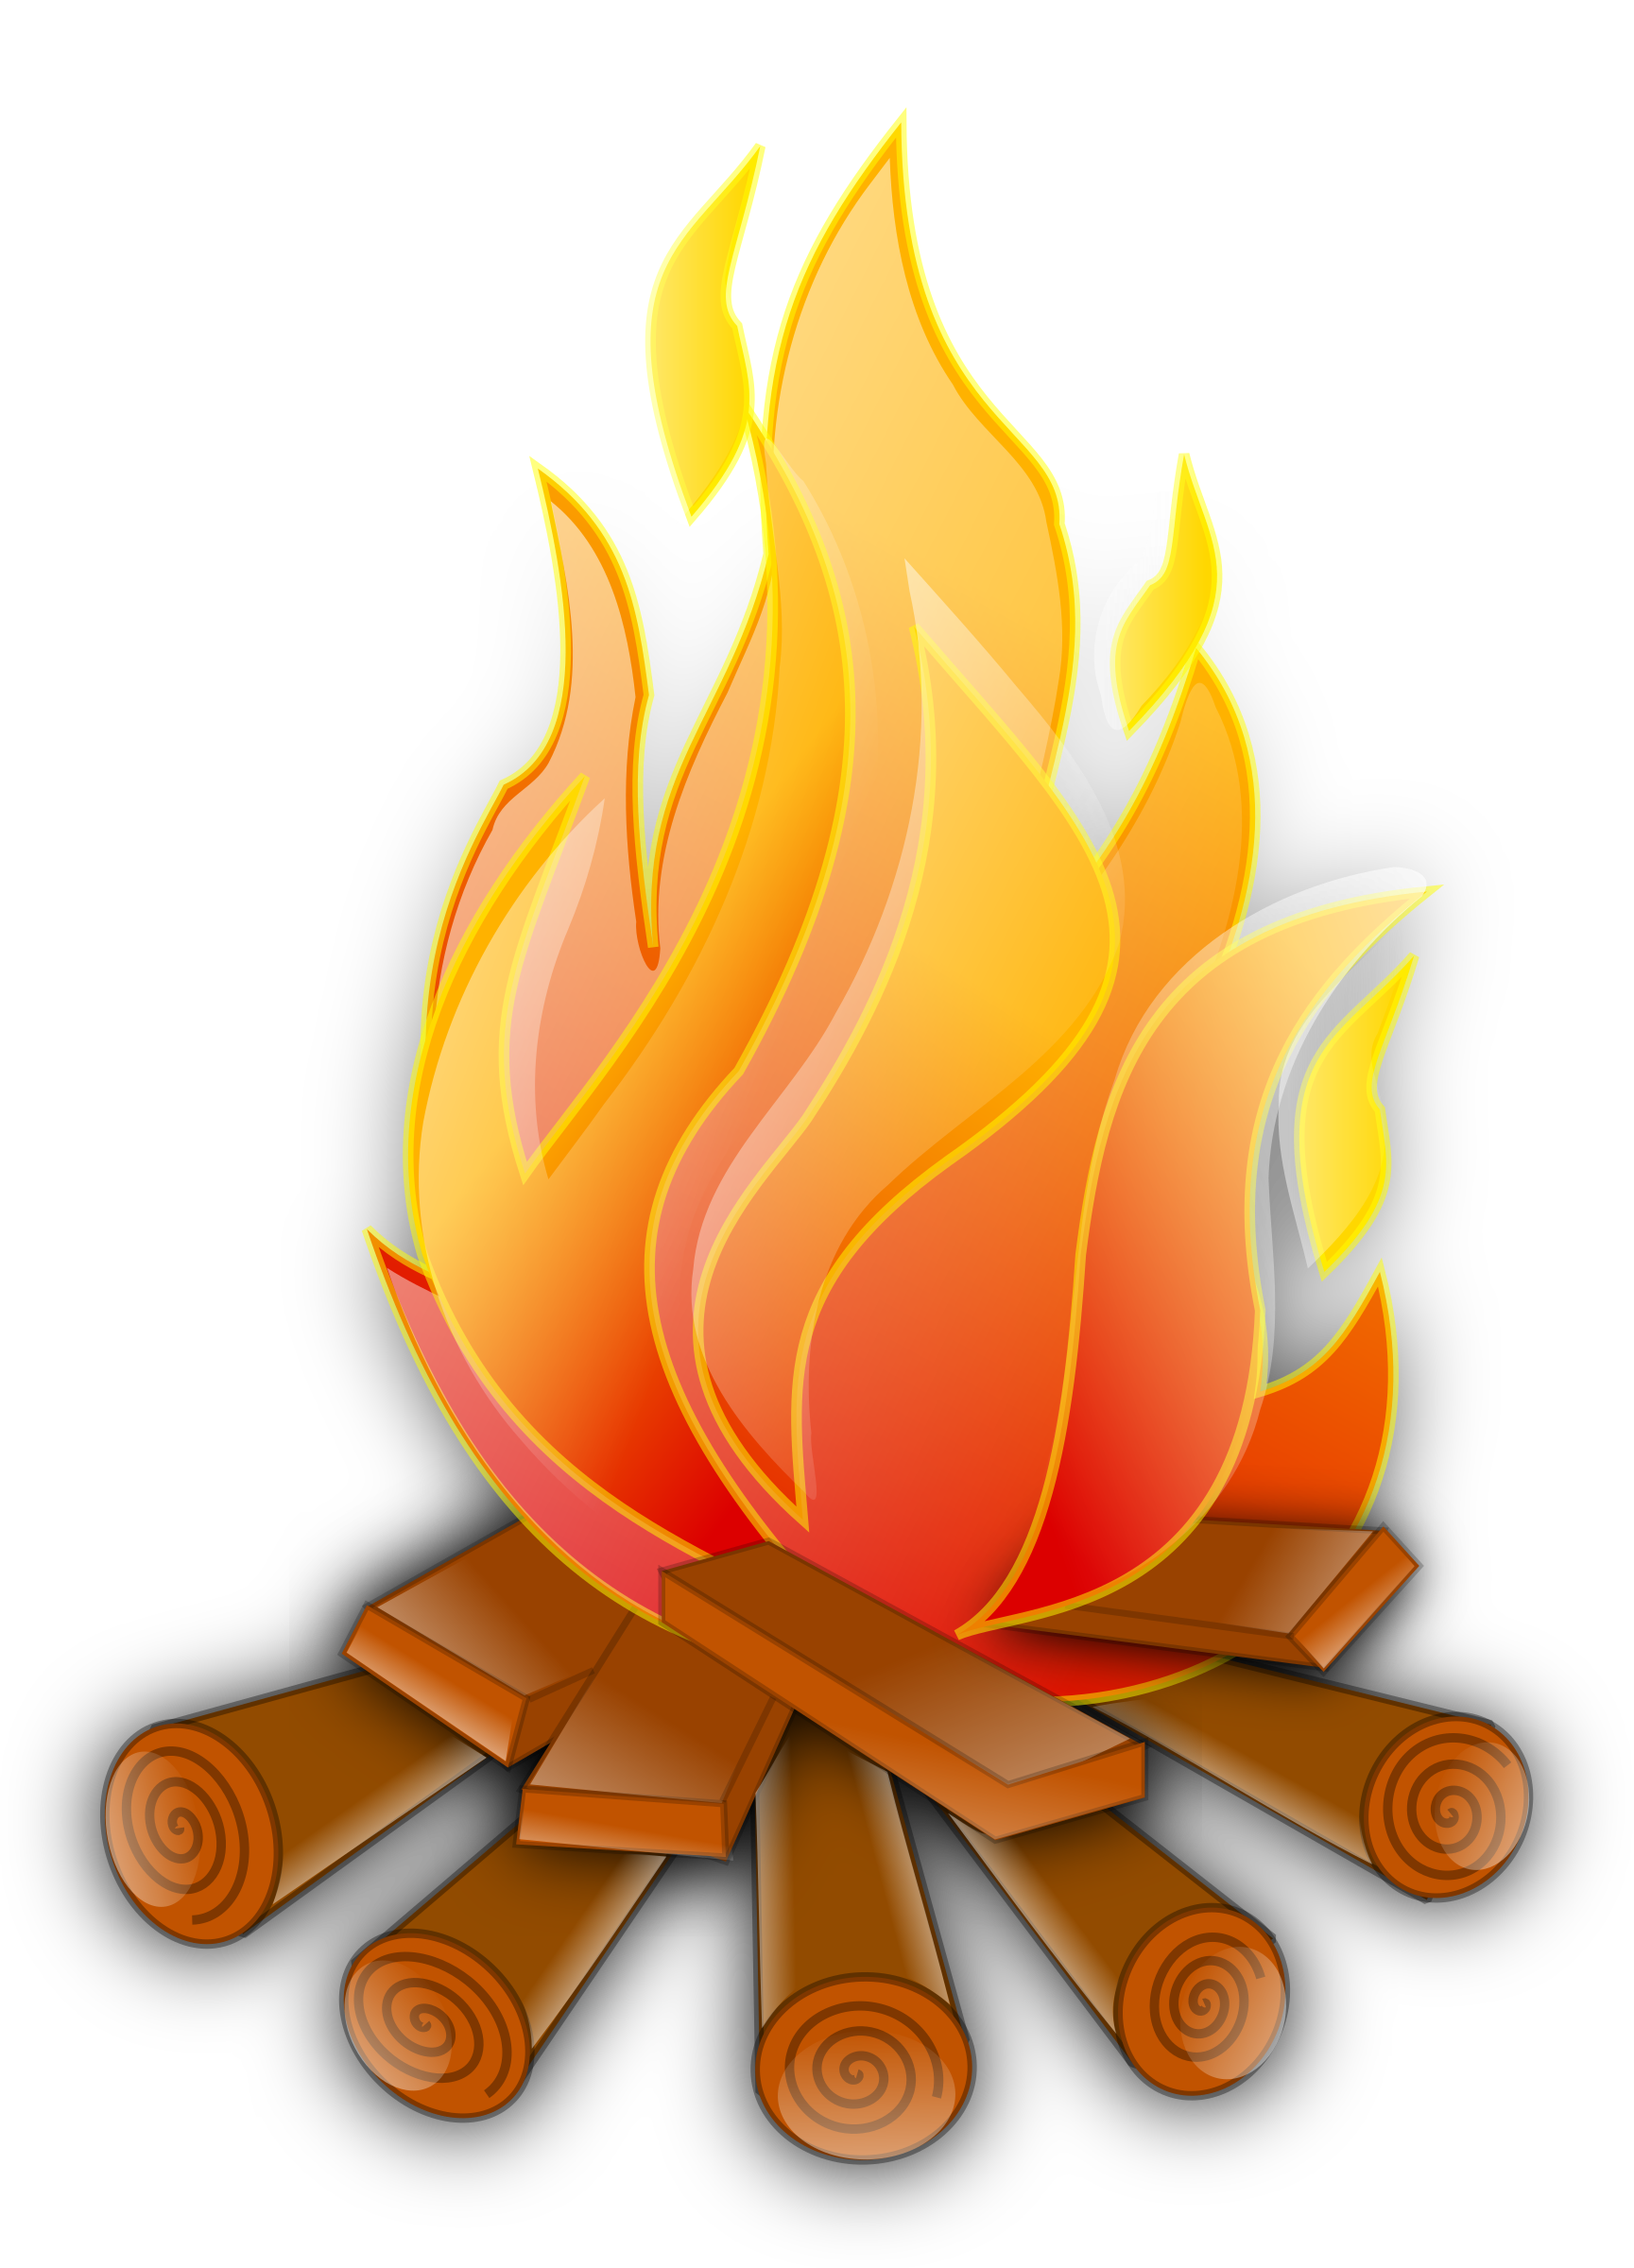 Clipart fire june holidays free fire clip art images flame - Cliparting.com